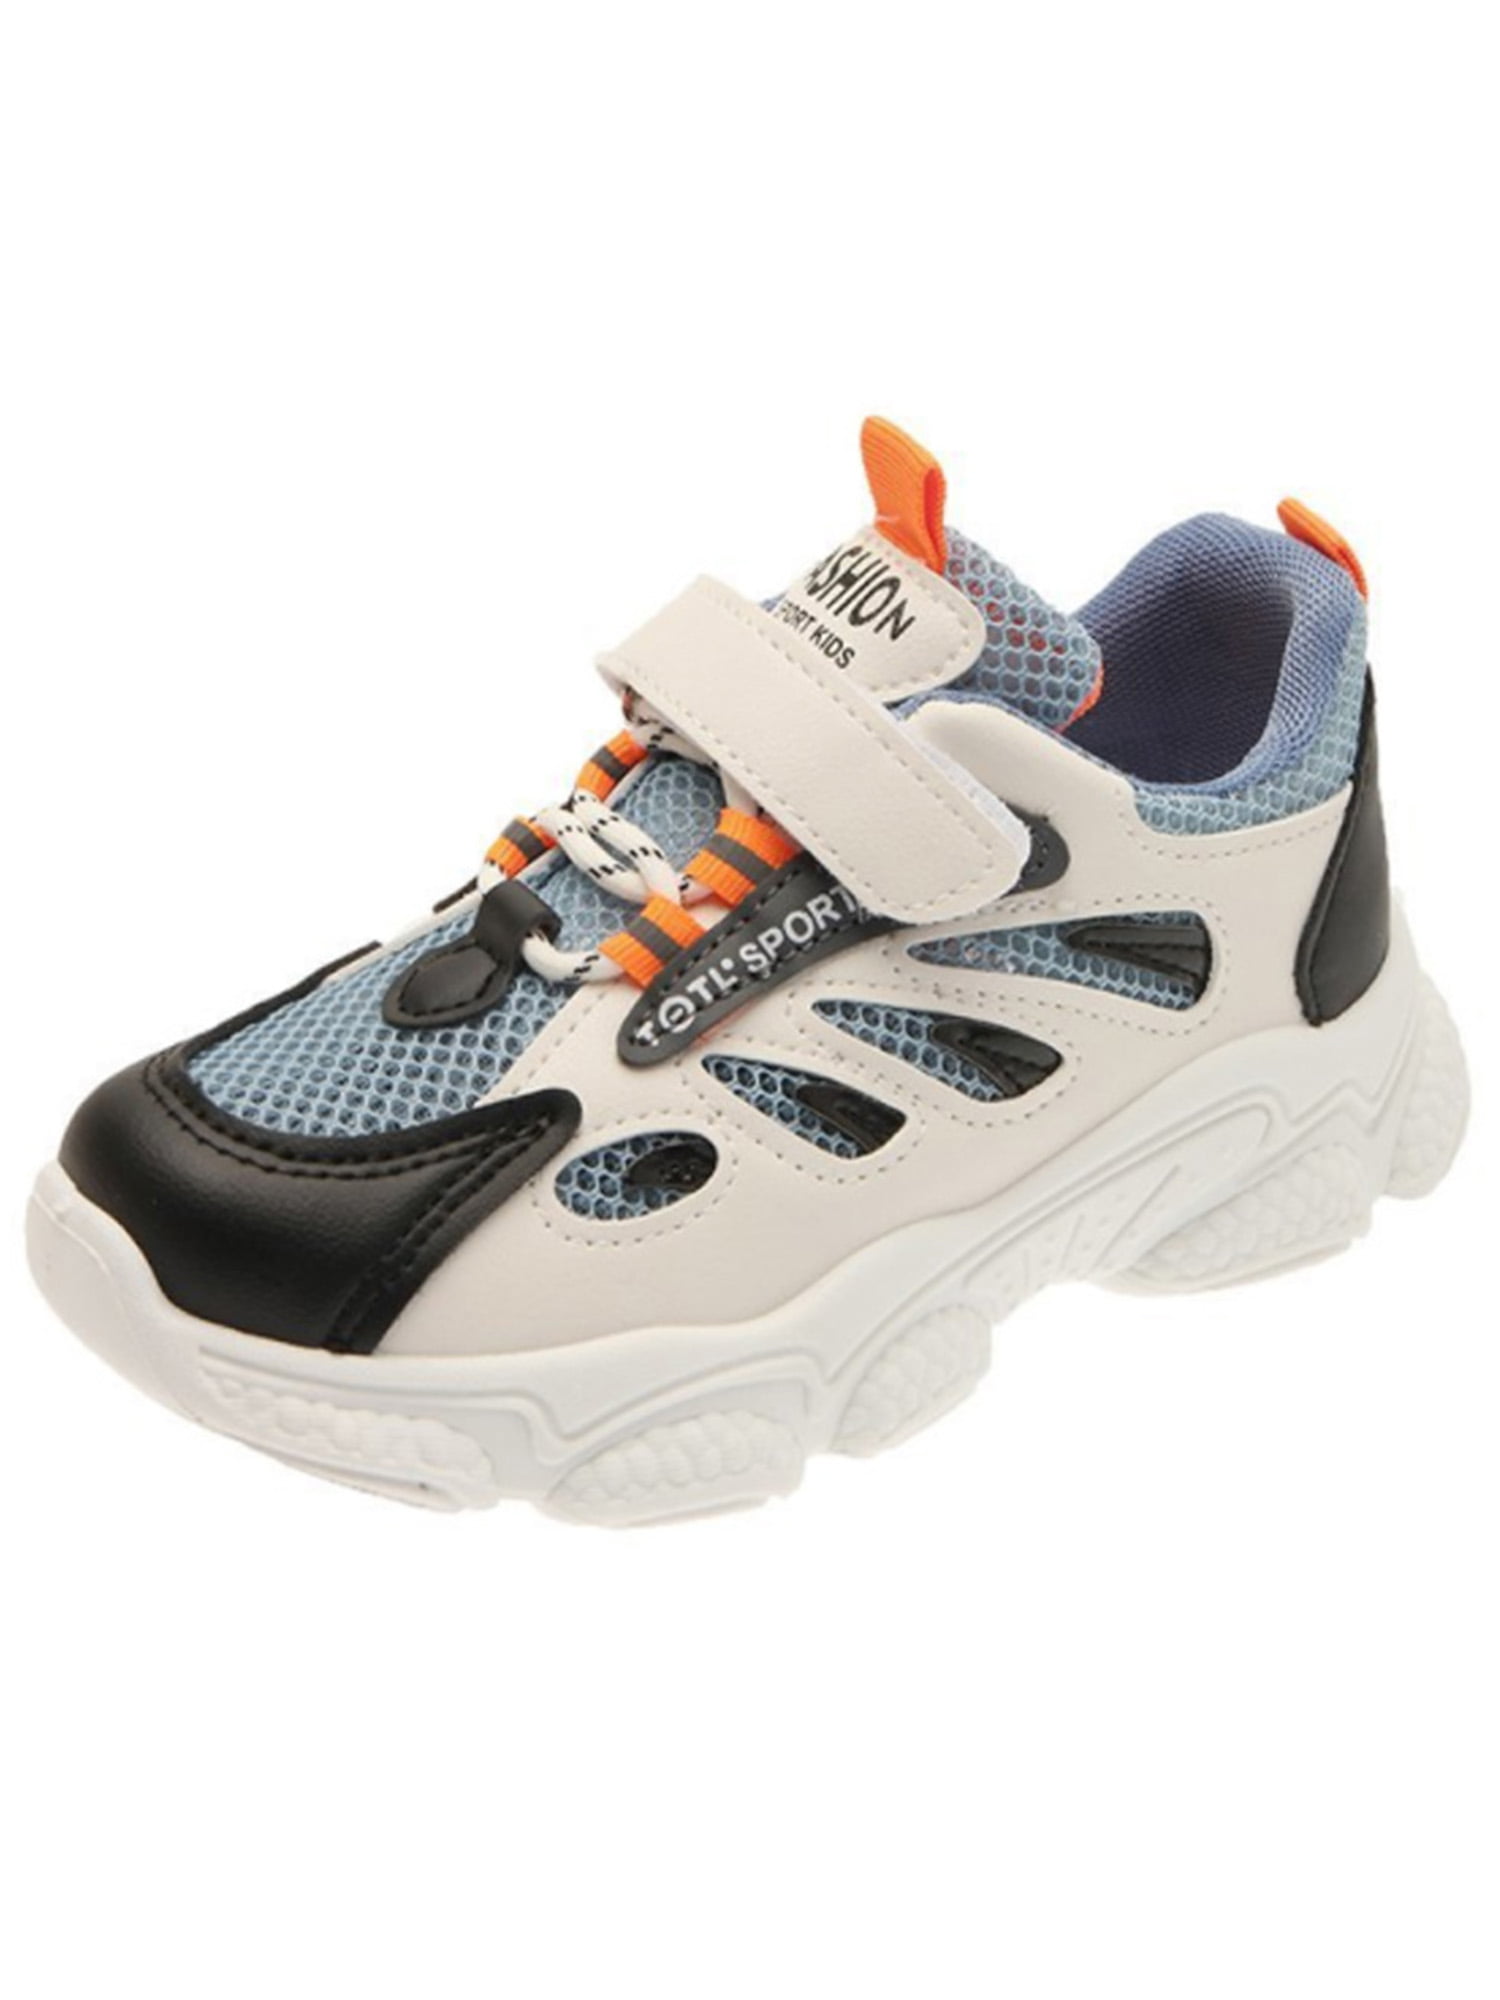 Details about   Boys Girls Sports Athletic Running Shoes School Gym Trainers Casual Sneaker Size 